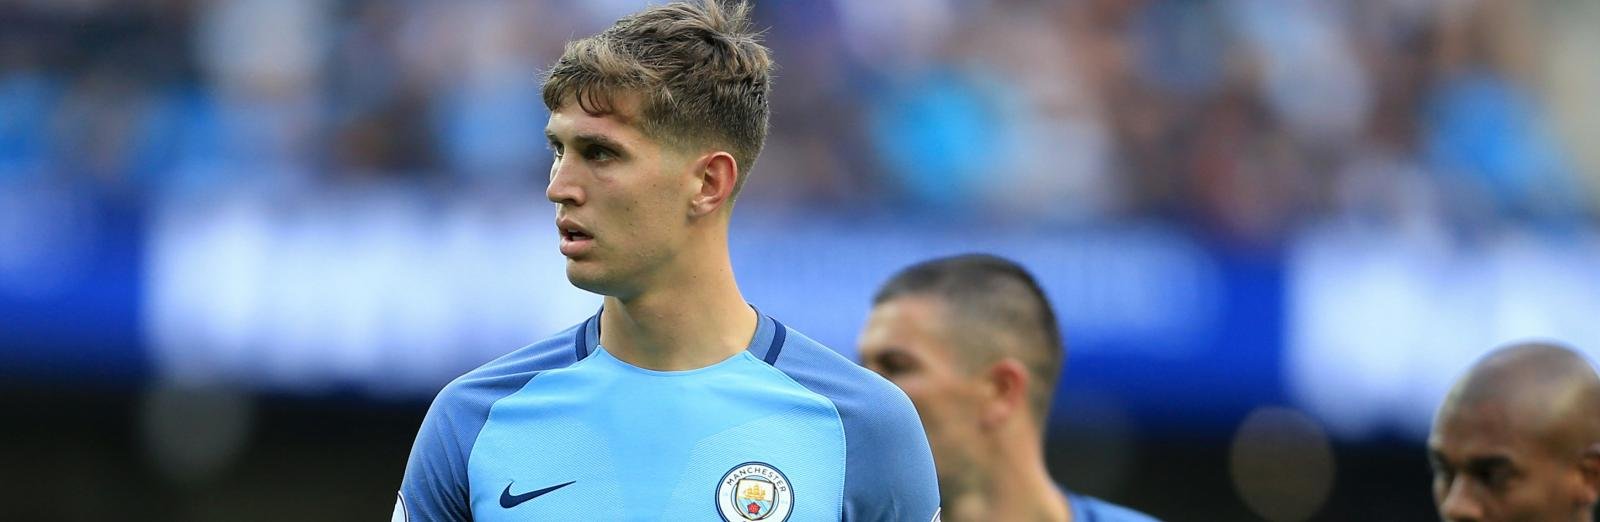 John Stones is already proving his worth at Manchester City